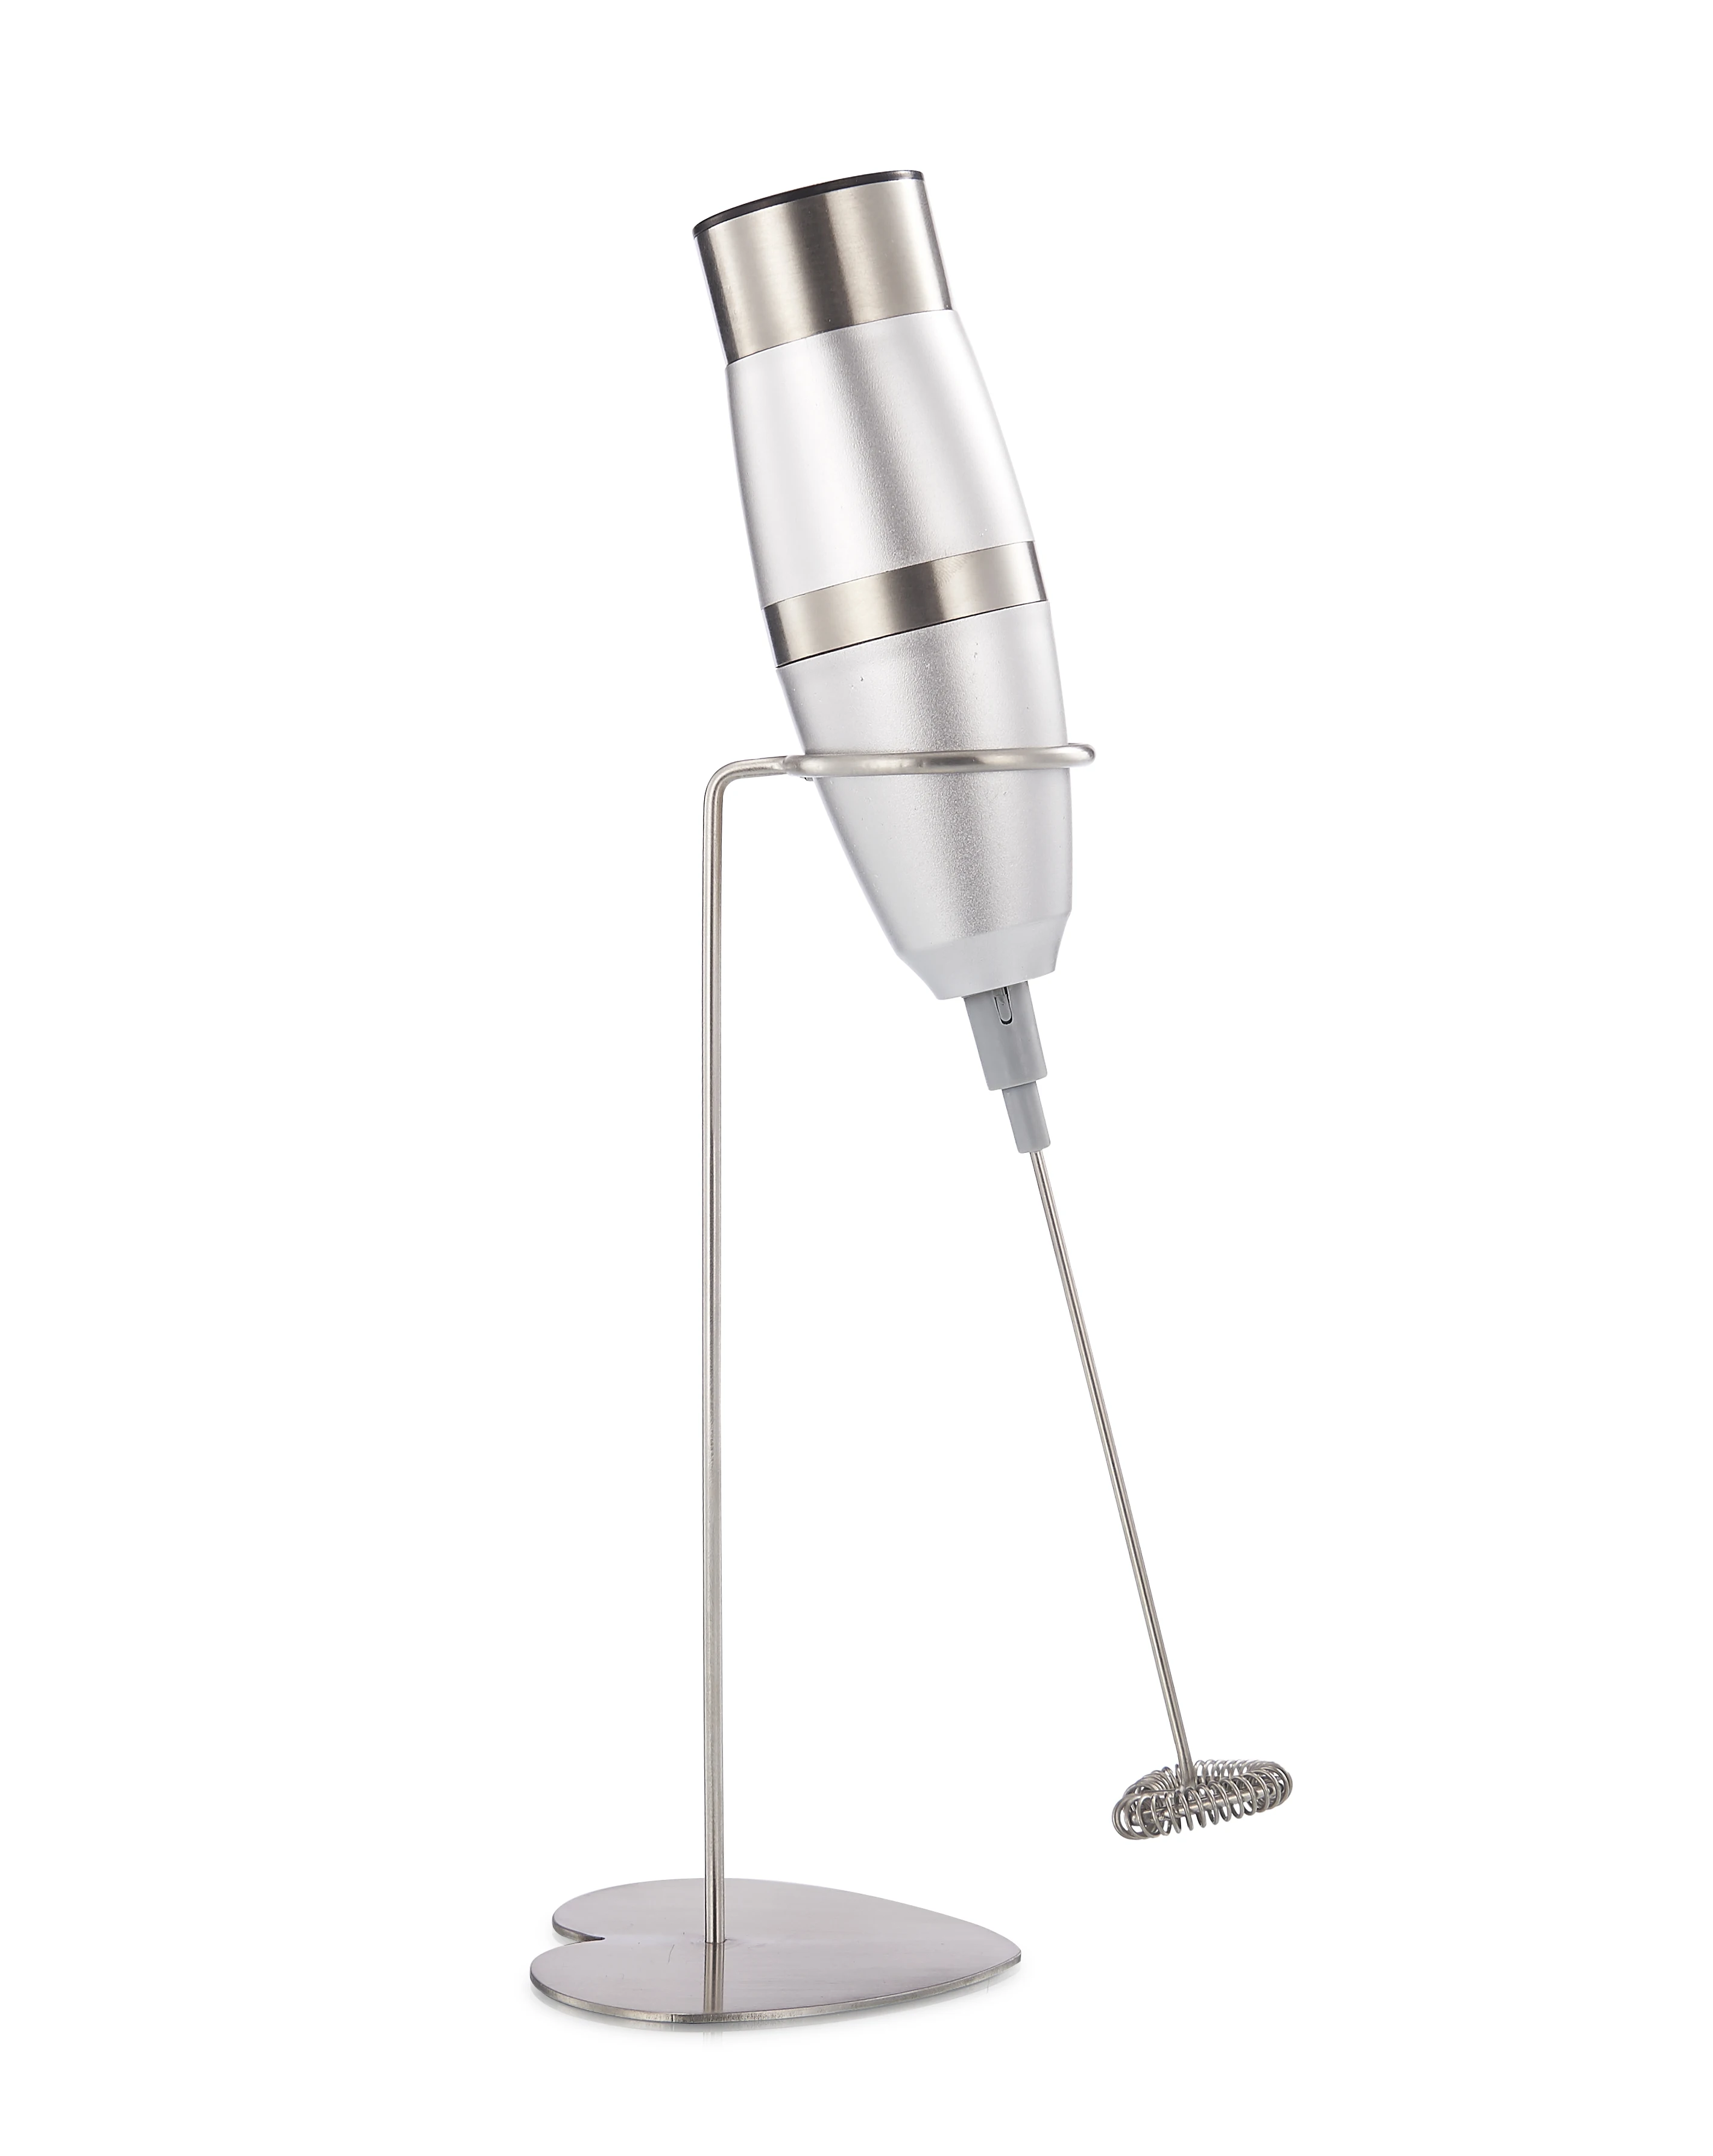 

High Quality Battery Foam Maker Blender Automatic Electric Handheld Milk Frother with Stand